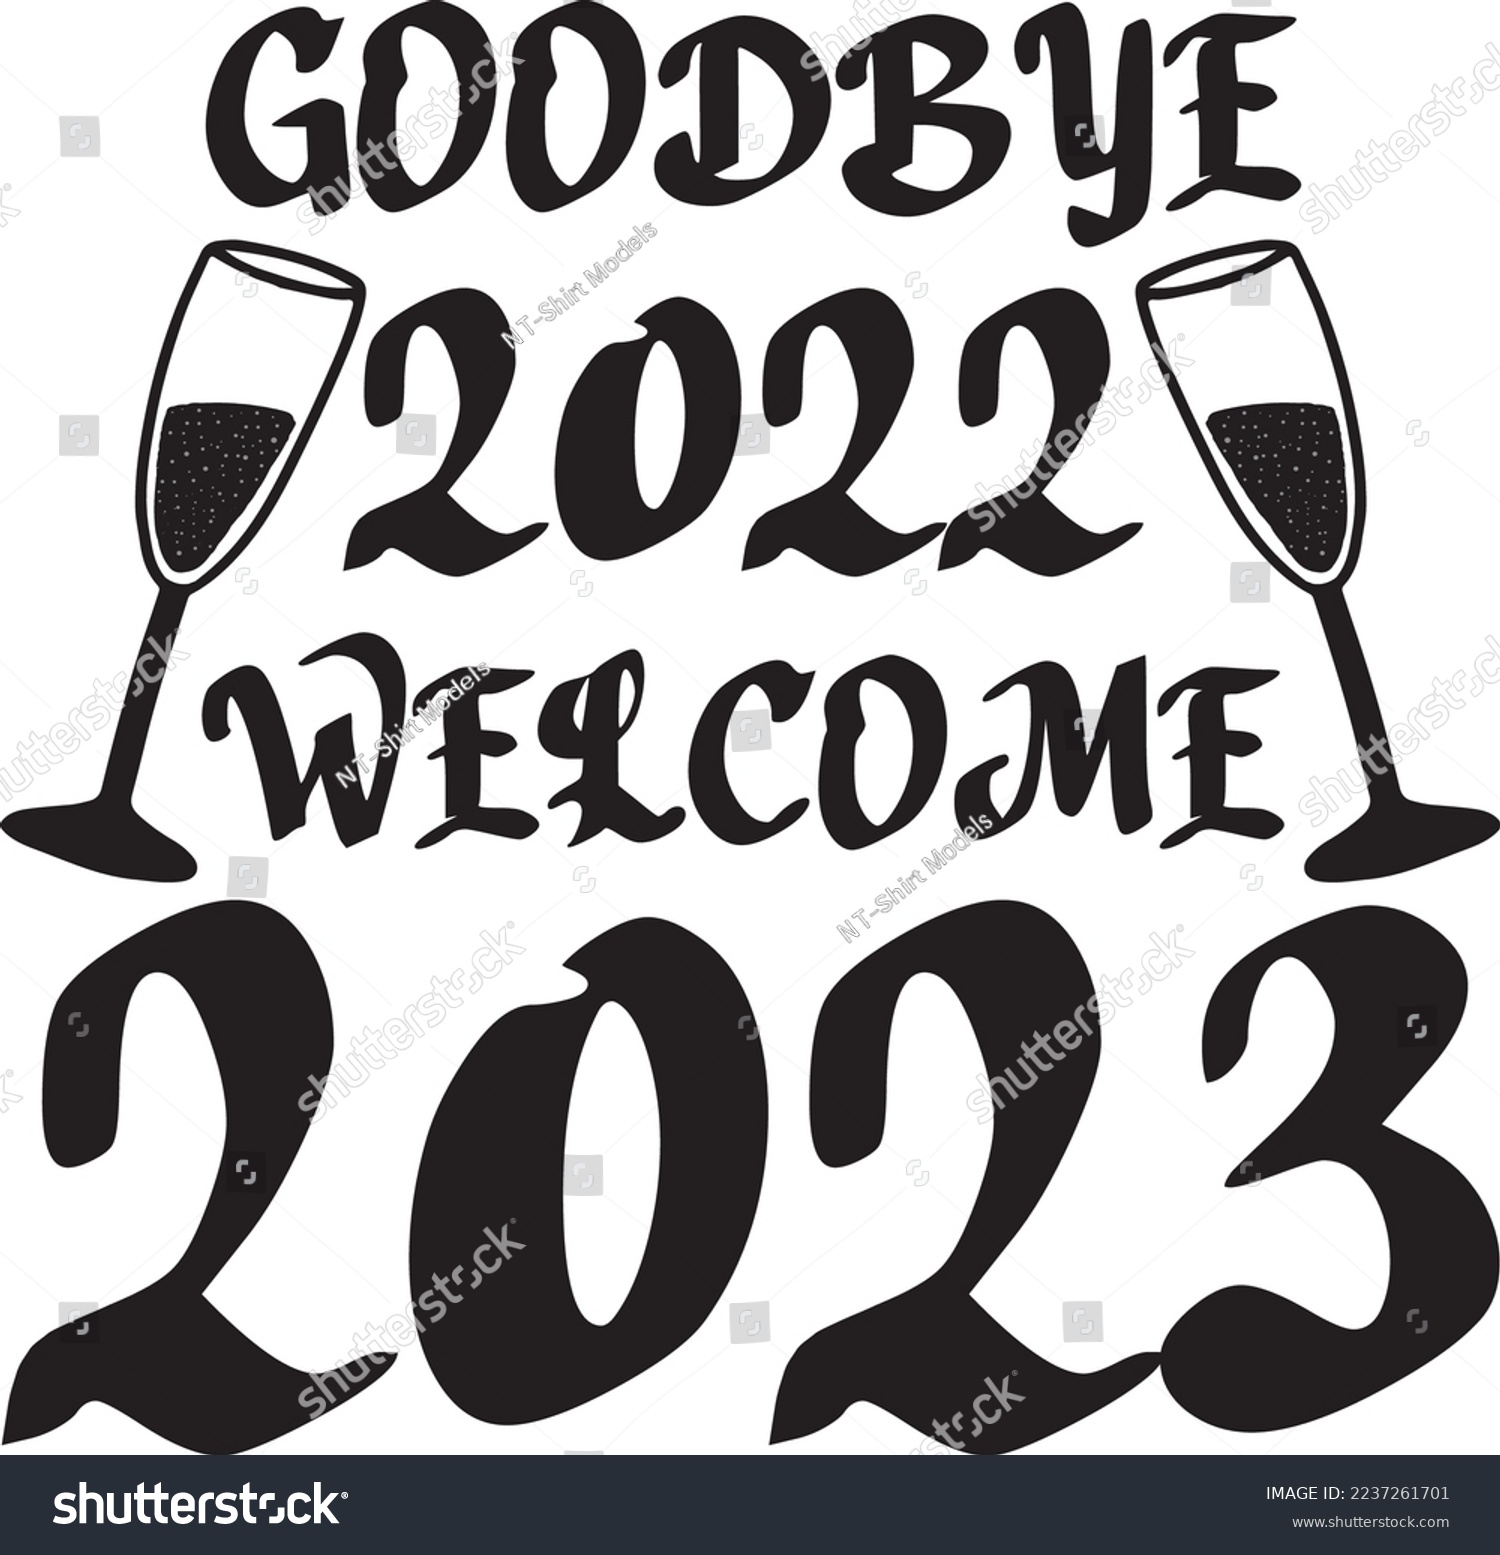 SVG of It's a New Year Bitches, Cheers To The New Year, Goodbye 2022 welcome 2023, Merry Christmas, Happy New Year 2023, sublimation, New Year Crew 2023 svg